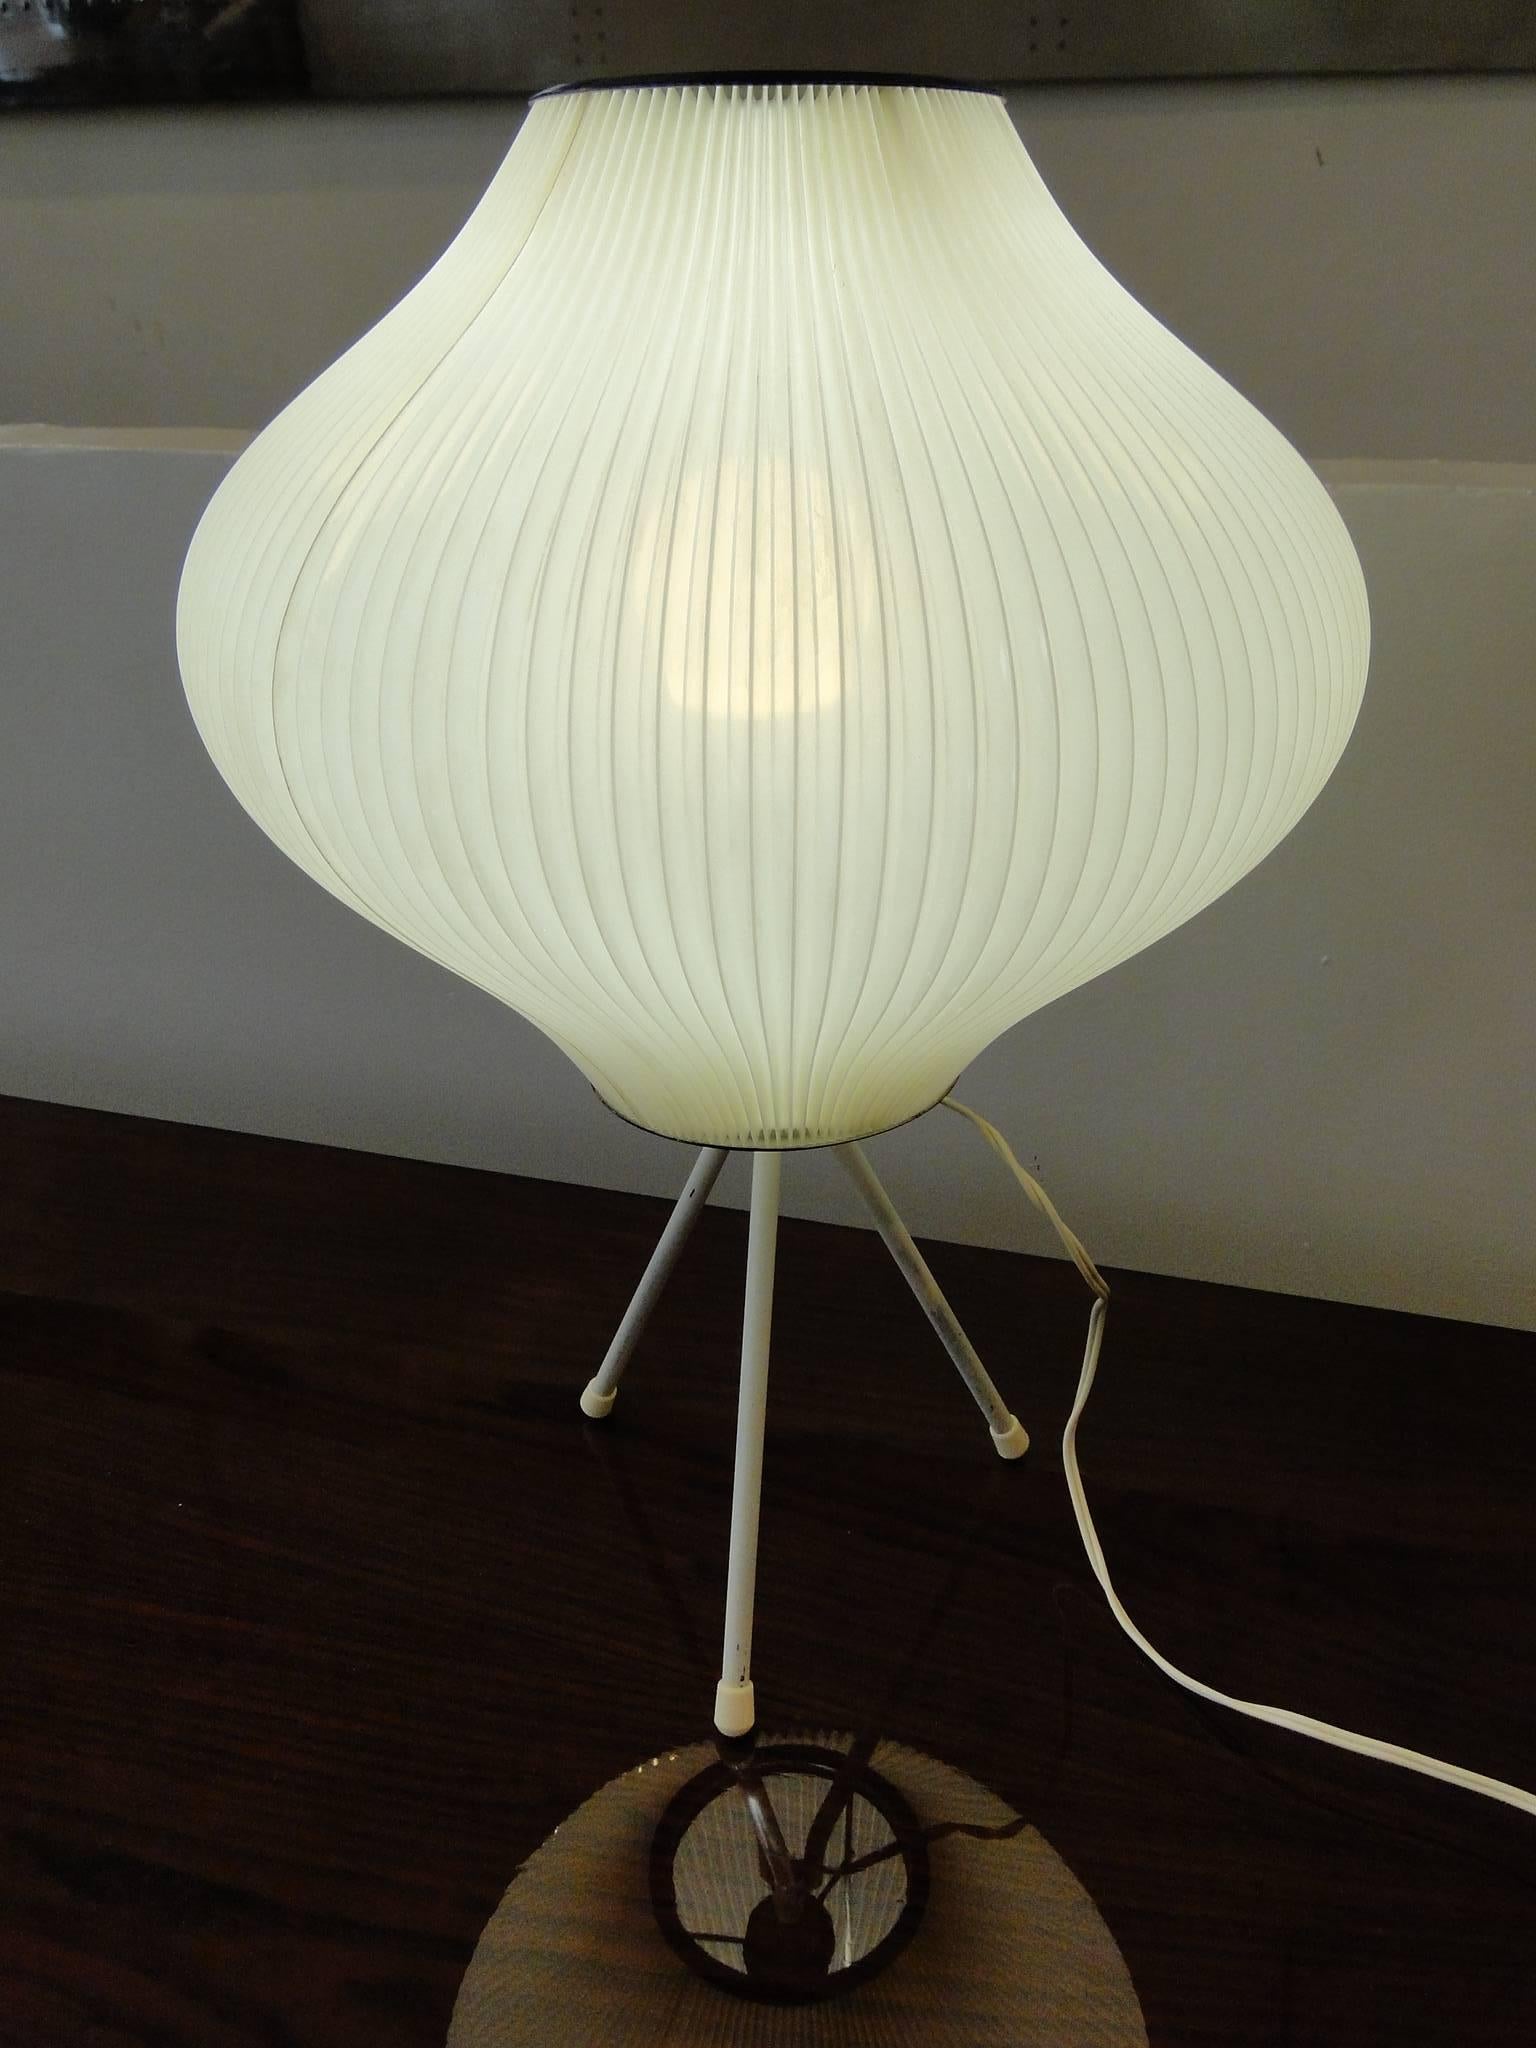 Rispal table lamp from 1960

The lamp is delivered whit plug for your Country 
Just to switch on 
(USA, JP, AUS, UK, FR, DE).